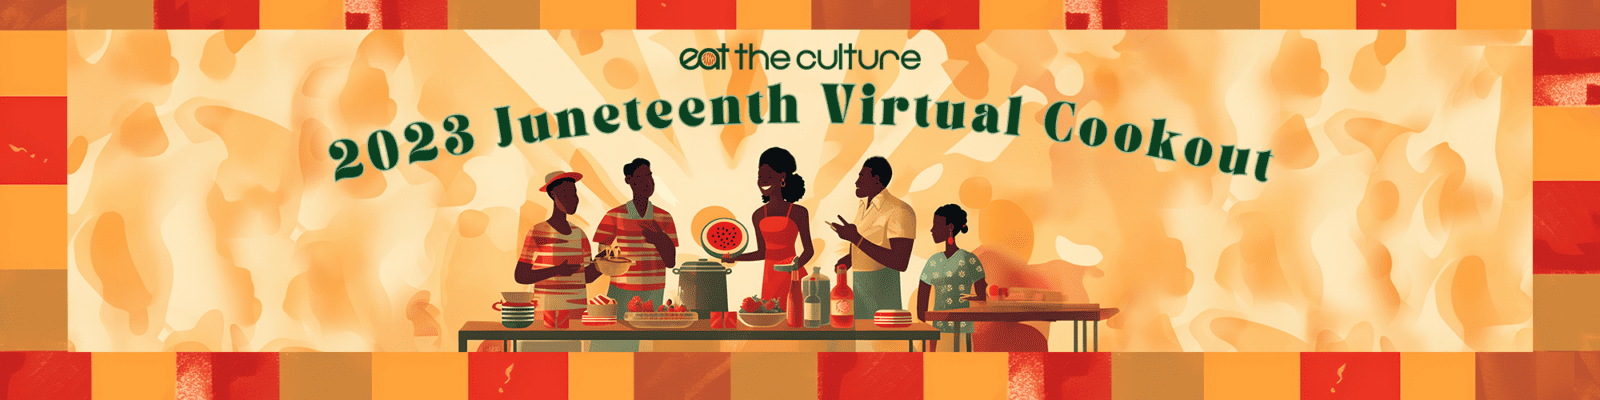 2023 Juneteenth Virtual Cookout by Eat the Culture